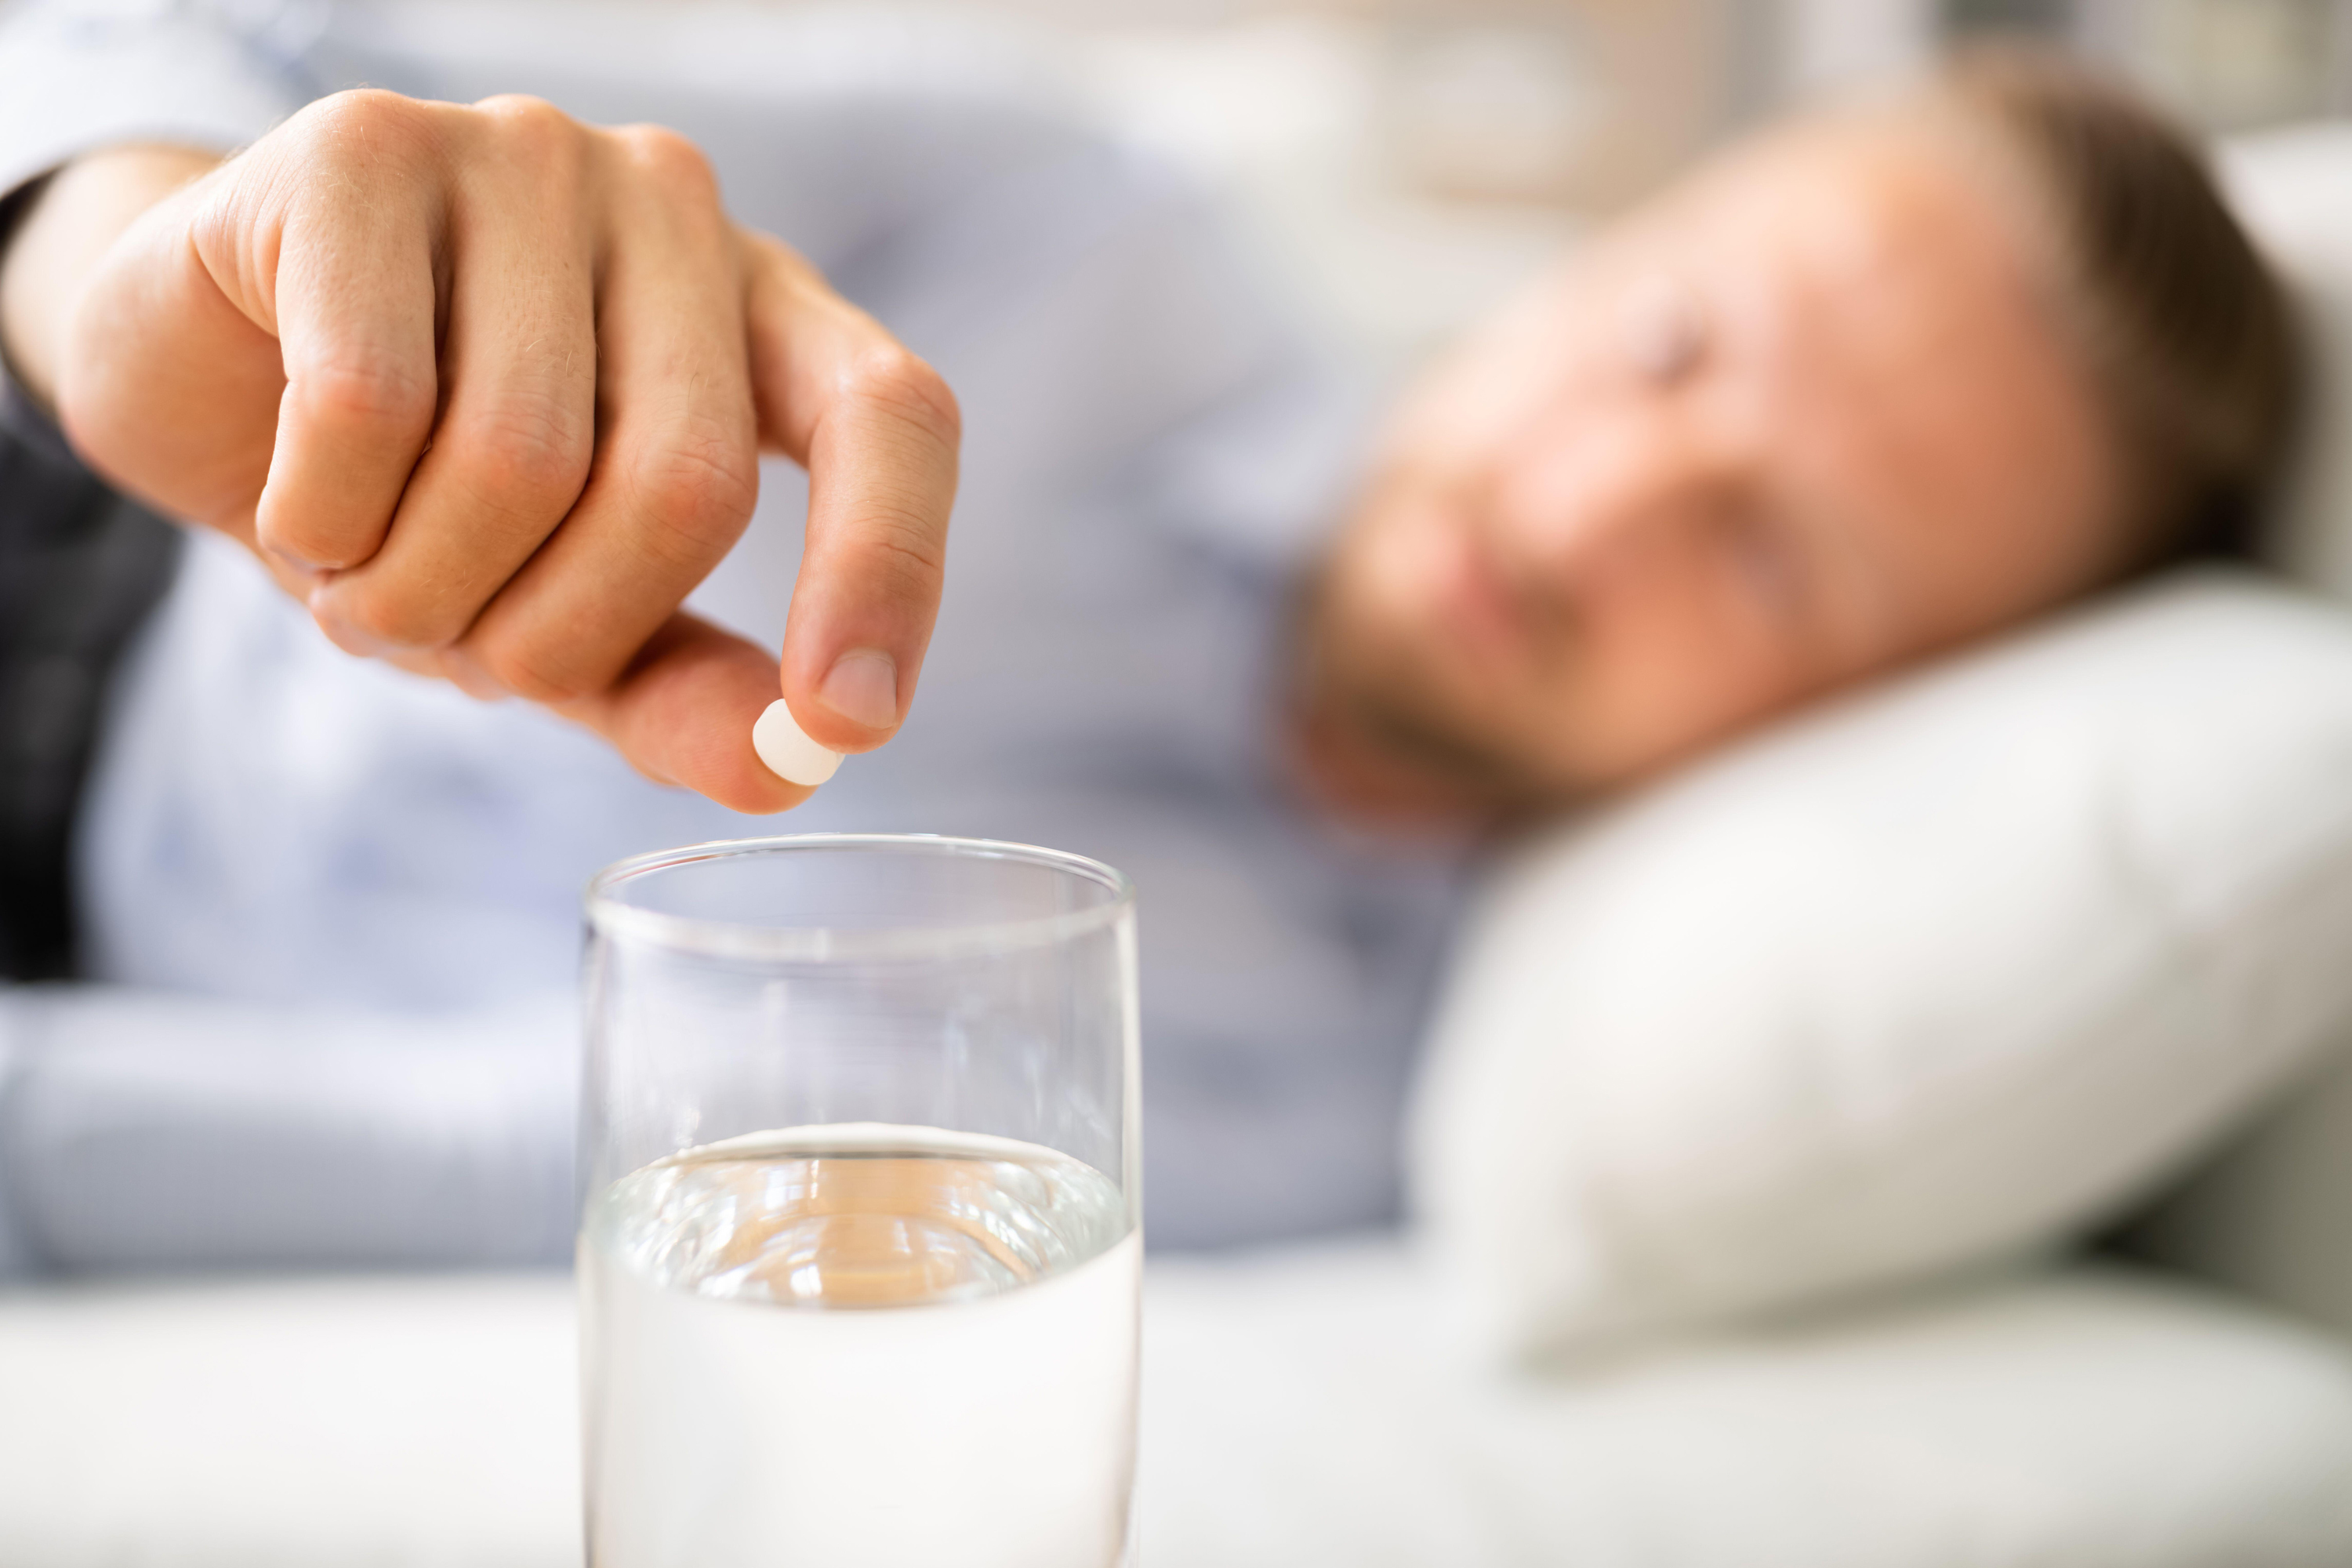 man with hangover putting painkiller into water